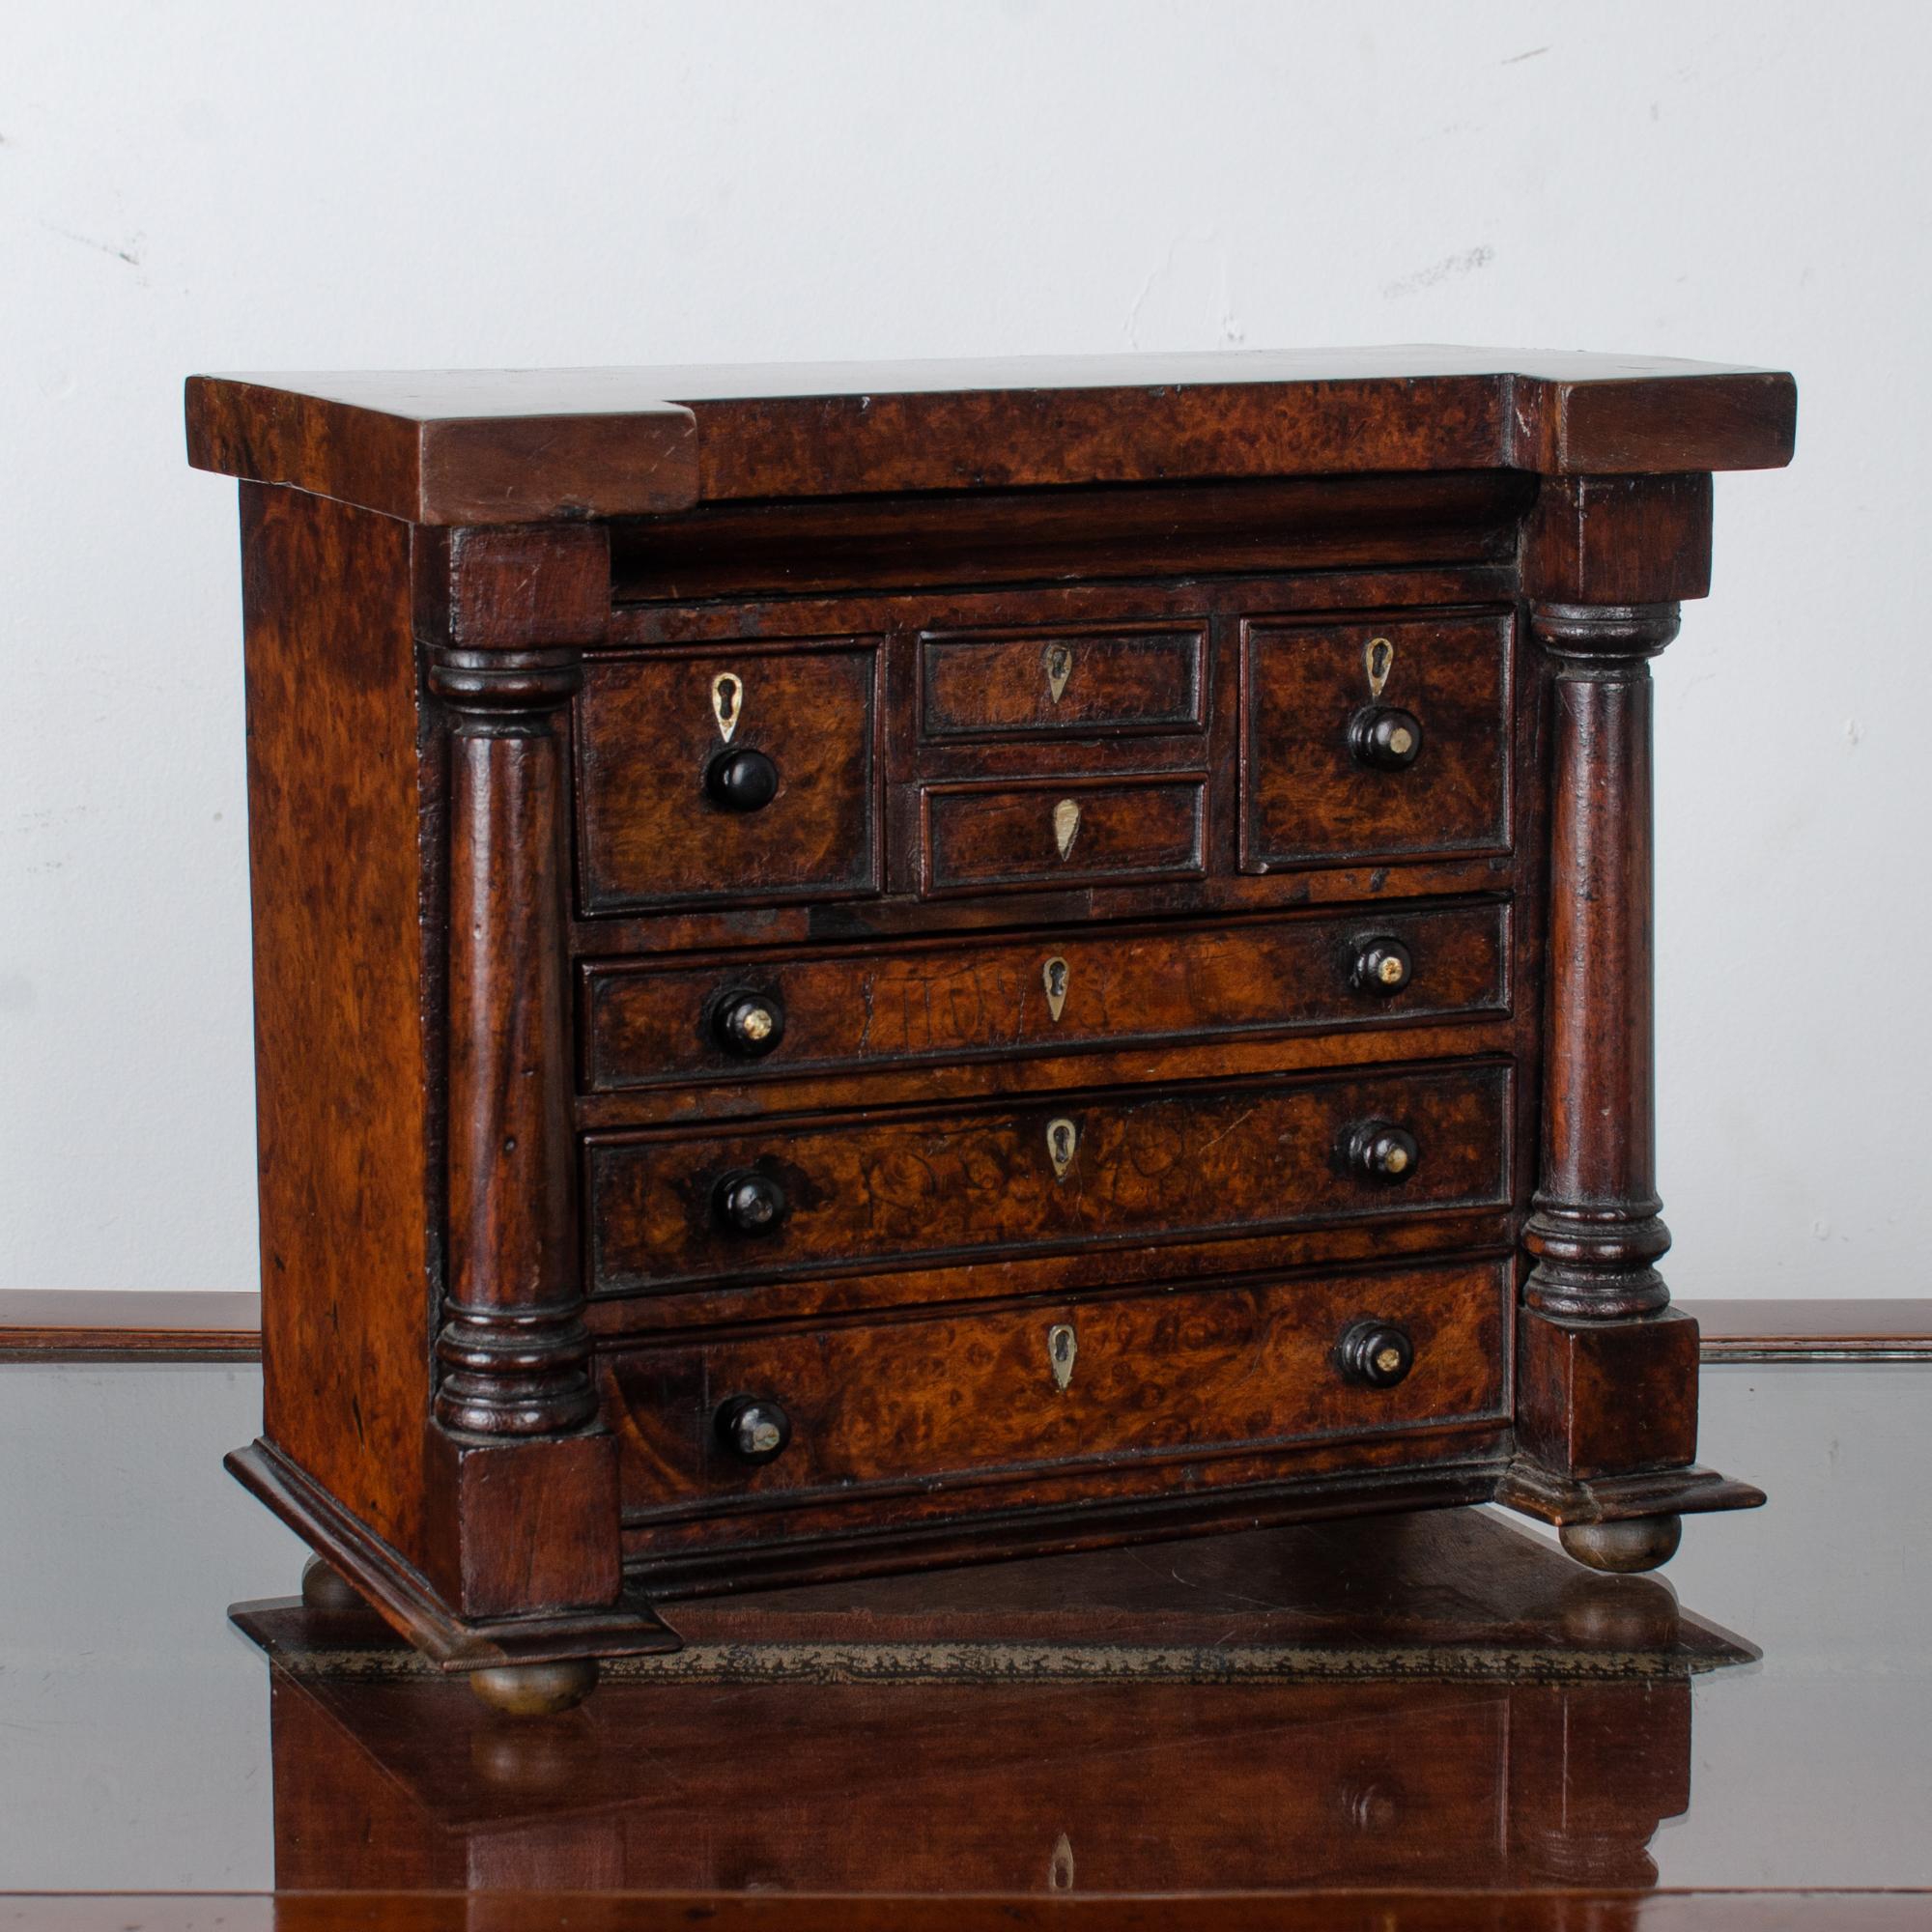 A Scottish miniature chest of drawers in burled wood.  

Drawer inscribed on underside with maker’s name: 

“E.B. McGowan; Bank St, Wigtown; 17th February 1863”

Hidden drawer on top with hole in rear to push open.  

Two small central drawers are